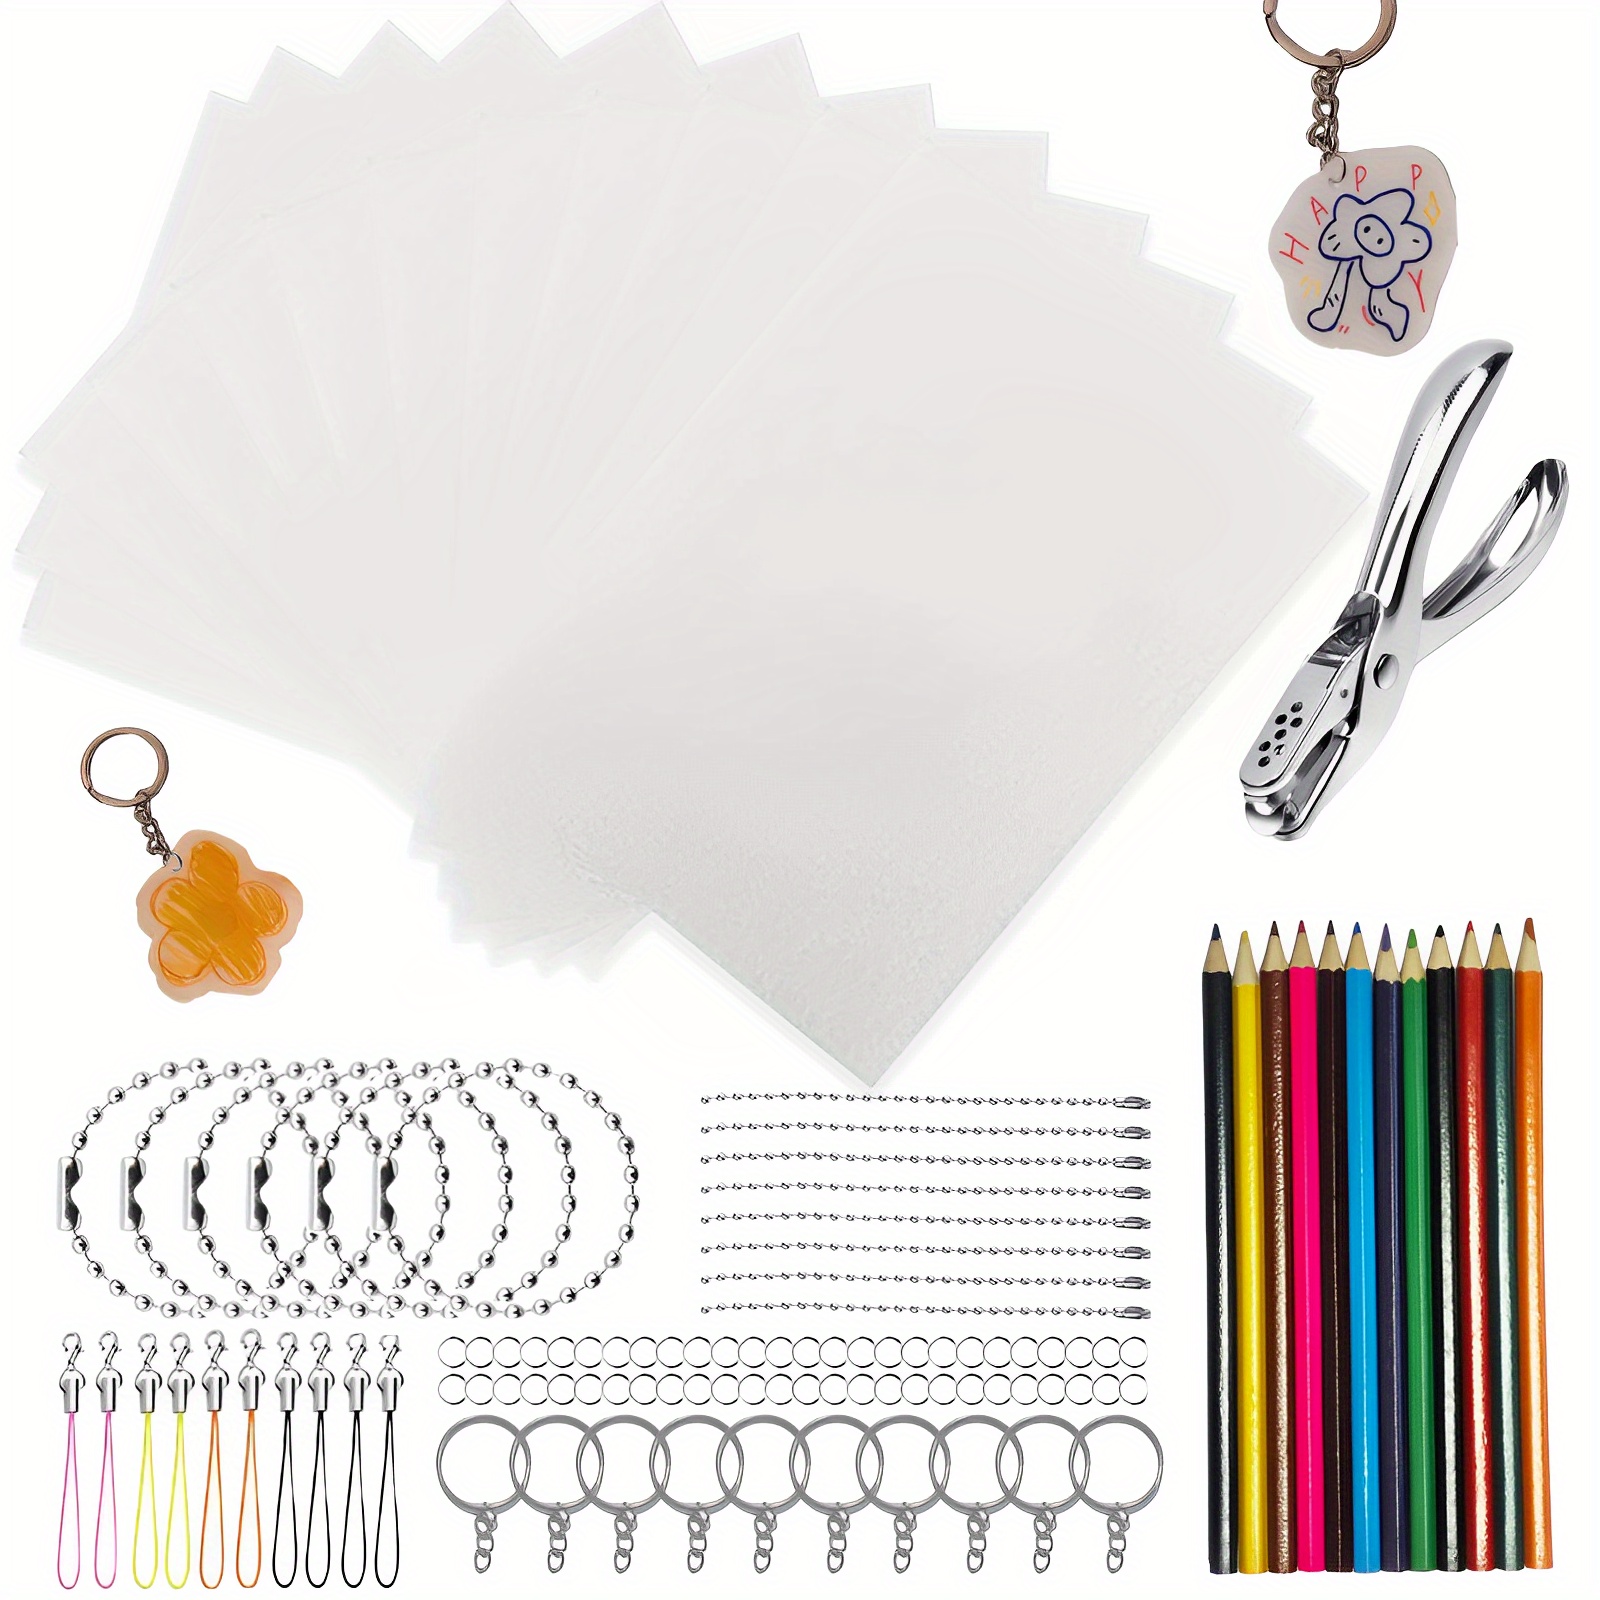 Pieces Heat Shrink Plastic Sheet Kit Shrink Film Papers With Keychains  Accessories for Jewelry Earing Necklace DIY Creative Craft 